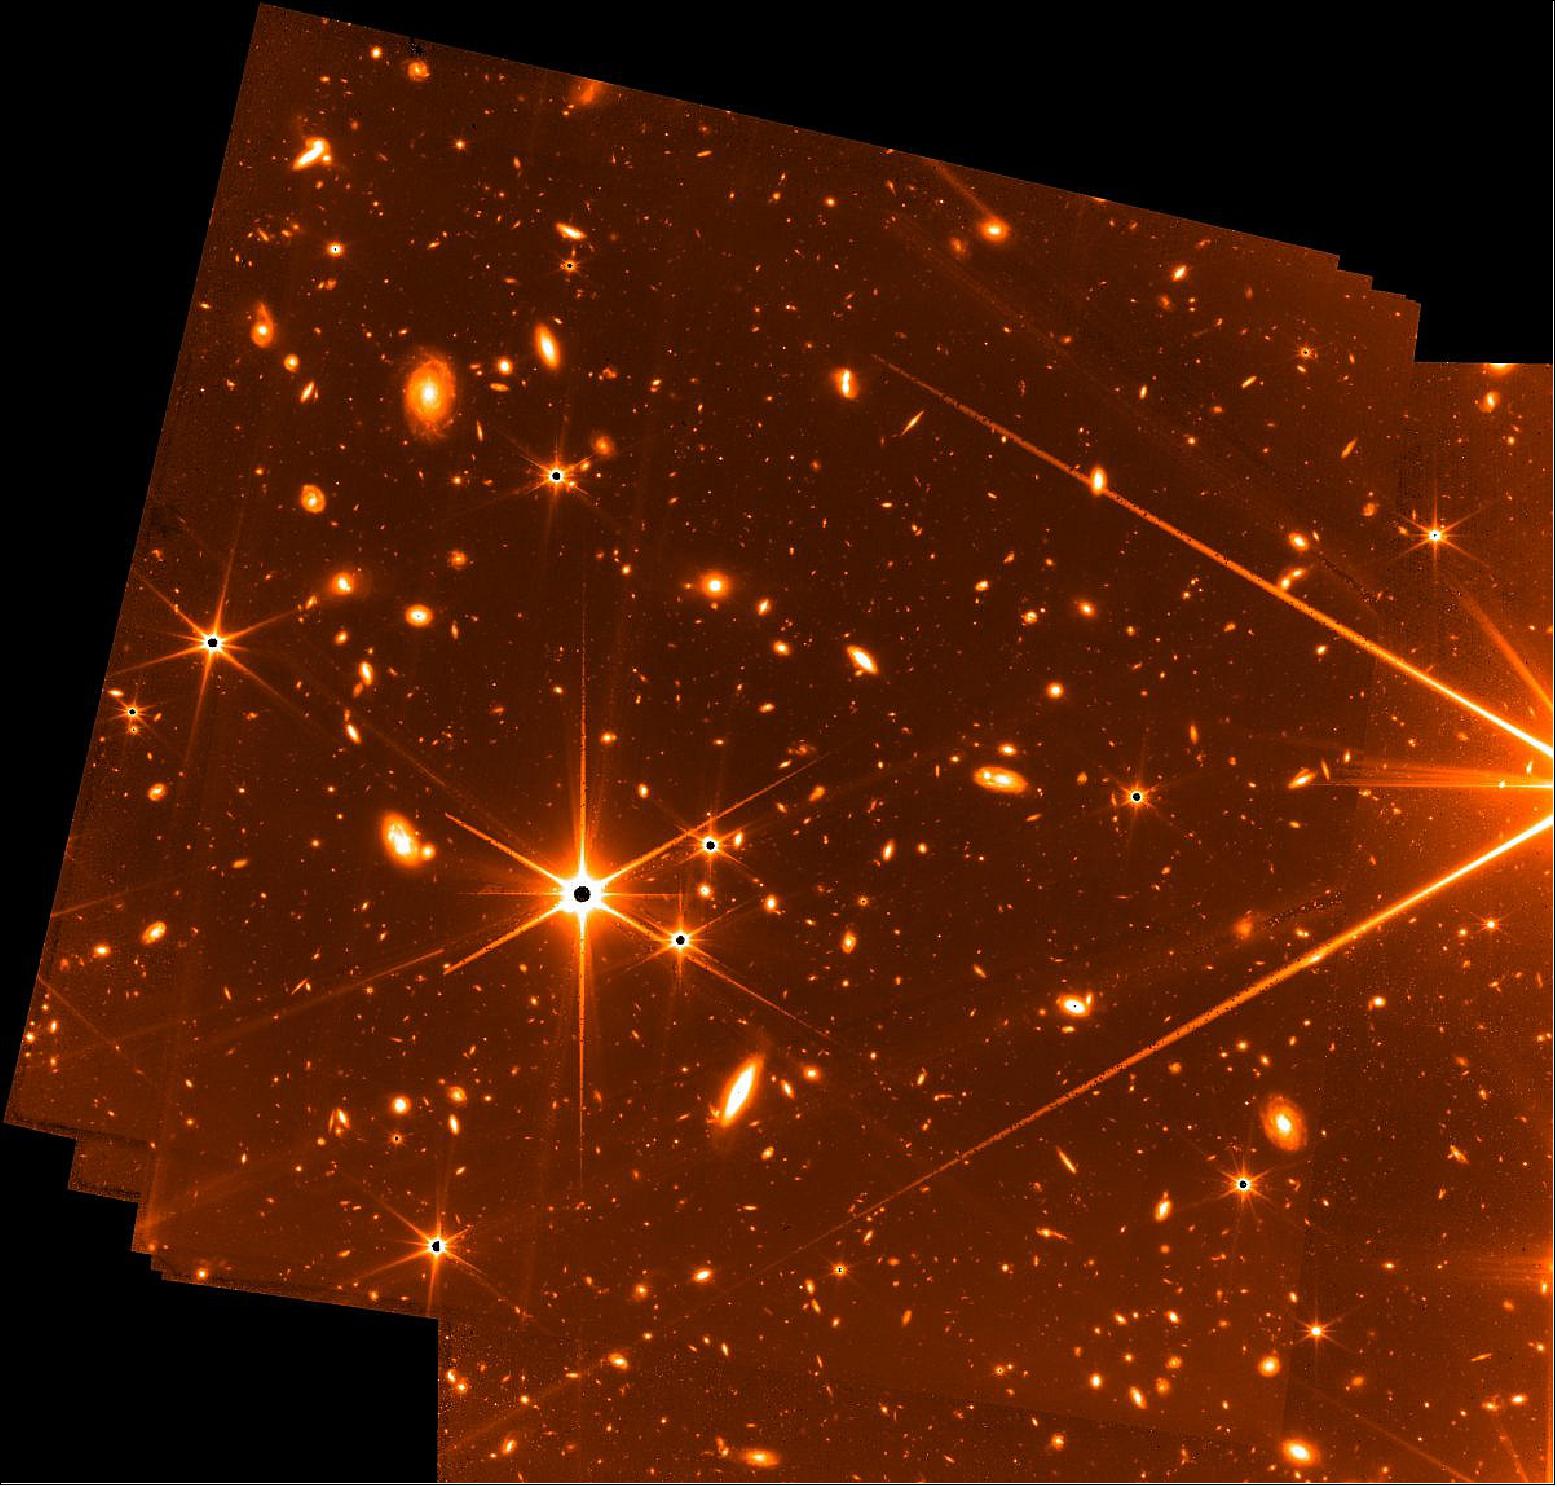 Figure 15: This Fine Guidance Sensor test image was acquired in parallel with NIRCam imaging of the star HD147980 over a period of eight days at the beginning of May. This engineering image represents a total of 32 hours of exposure time at several overlapping pointings of the Guider 2 channel. The observations were not optimized for detection of faint objects, but nevertheless the image captures extremely faint objects and is, for now, the deepest image of the infrared sky. The unfiltered wavelength response of the guider, from 0.6 to 5 µm, helps provide this extreme sensitivity. The image is mono-chromatic and is displayed in false color with white-yellow-orange-red representing the progression from brightest to dimmest. The bright star (at 9.3 magnitude) on the right hand edge is 2MASS 16235798+2826079. There are only a handful of stars in this image – distinguished by their diffraction spikes. The rest of the objects are thousands of faint galaxies, some in the nearby universe, but many, many more in the distant universe (image credits: NASA, CSA, and FGS team)